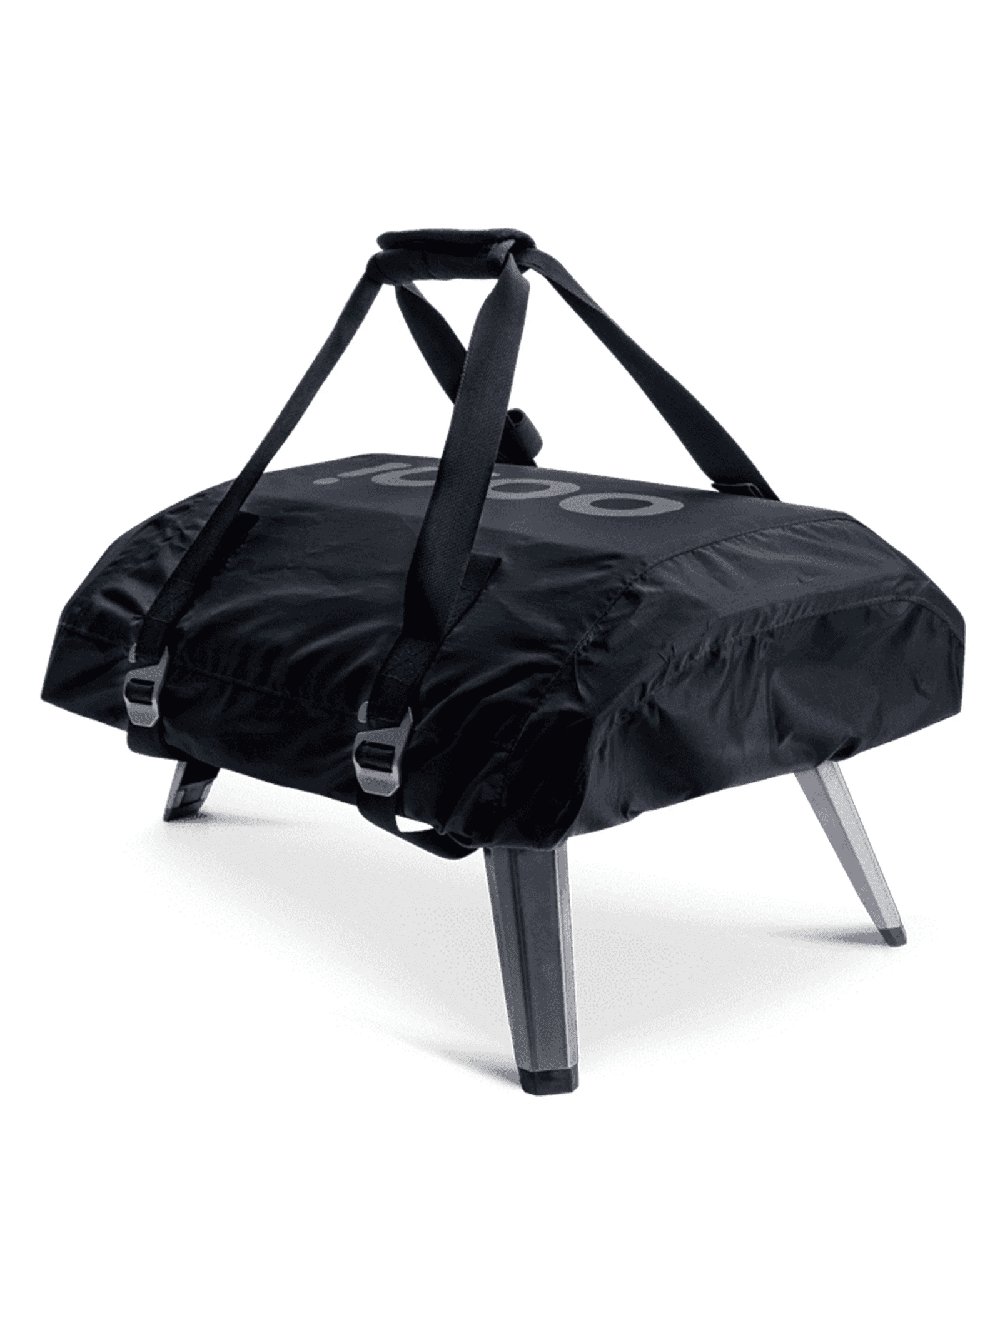 Ooni Koda 12" Cover and Carry Ooni Chilliwack BBQ Supply